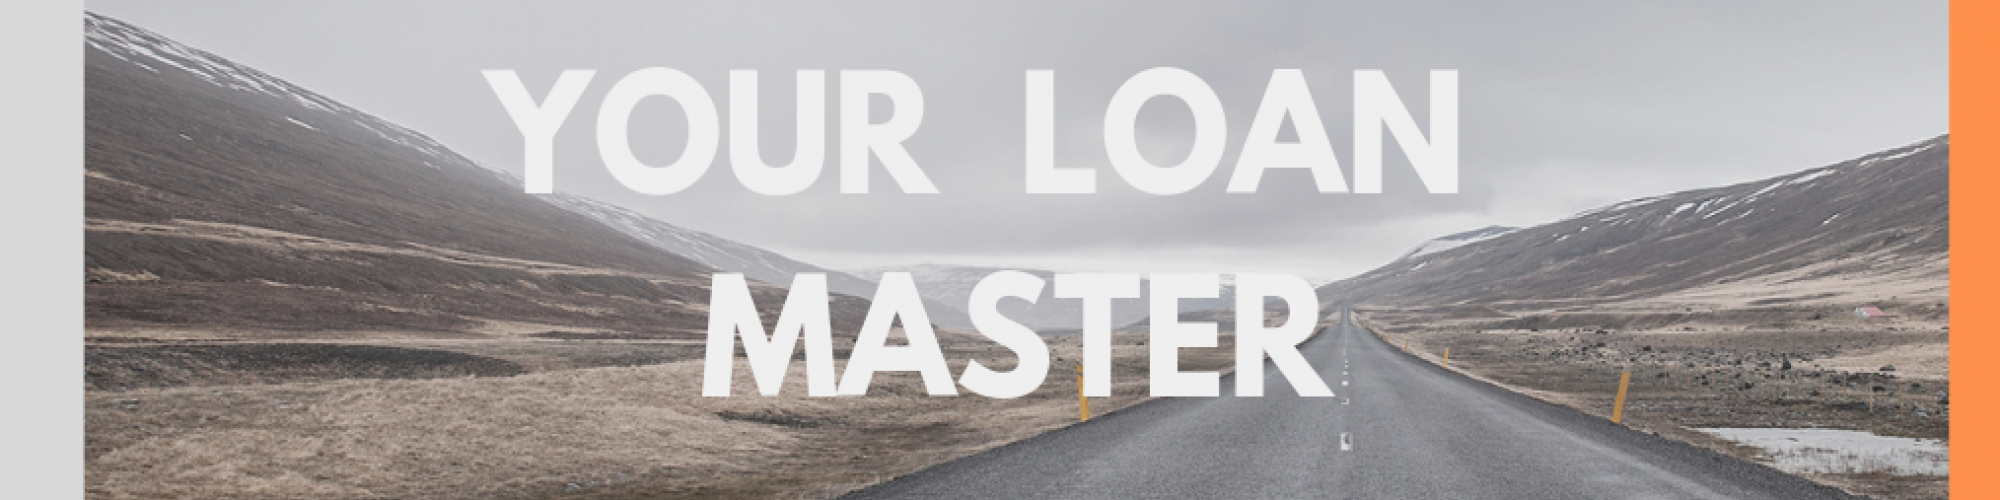 Yourloanmaster Financial Services